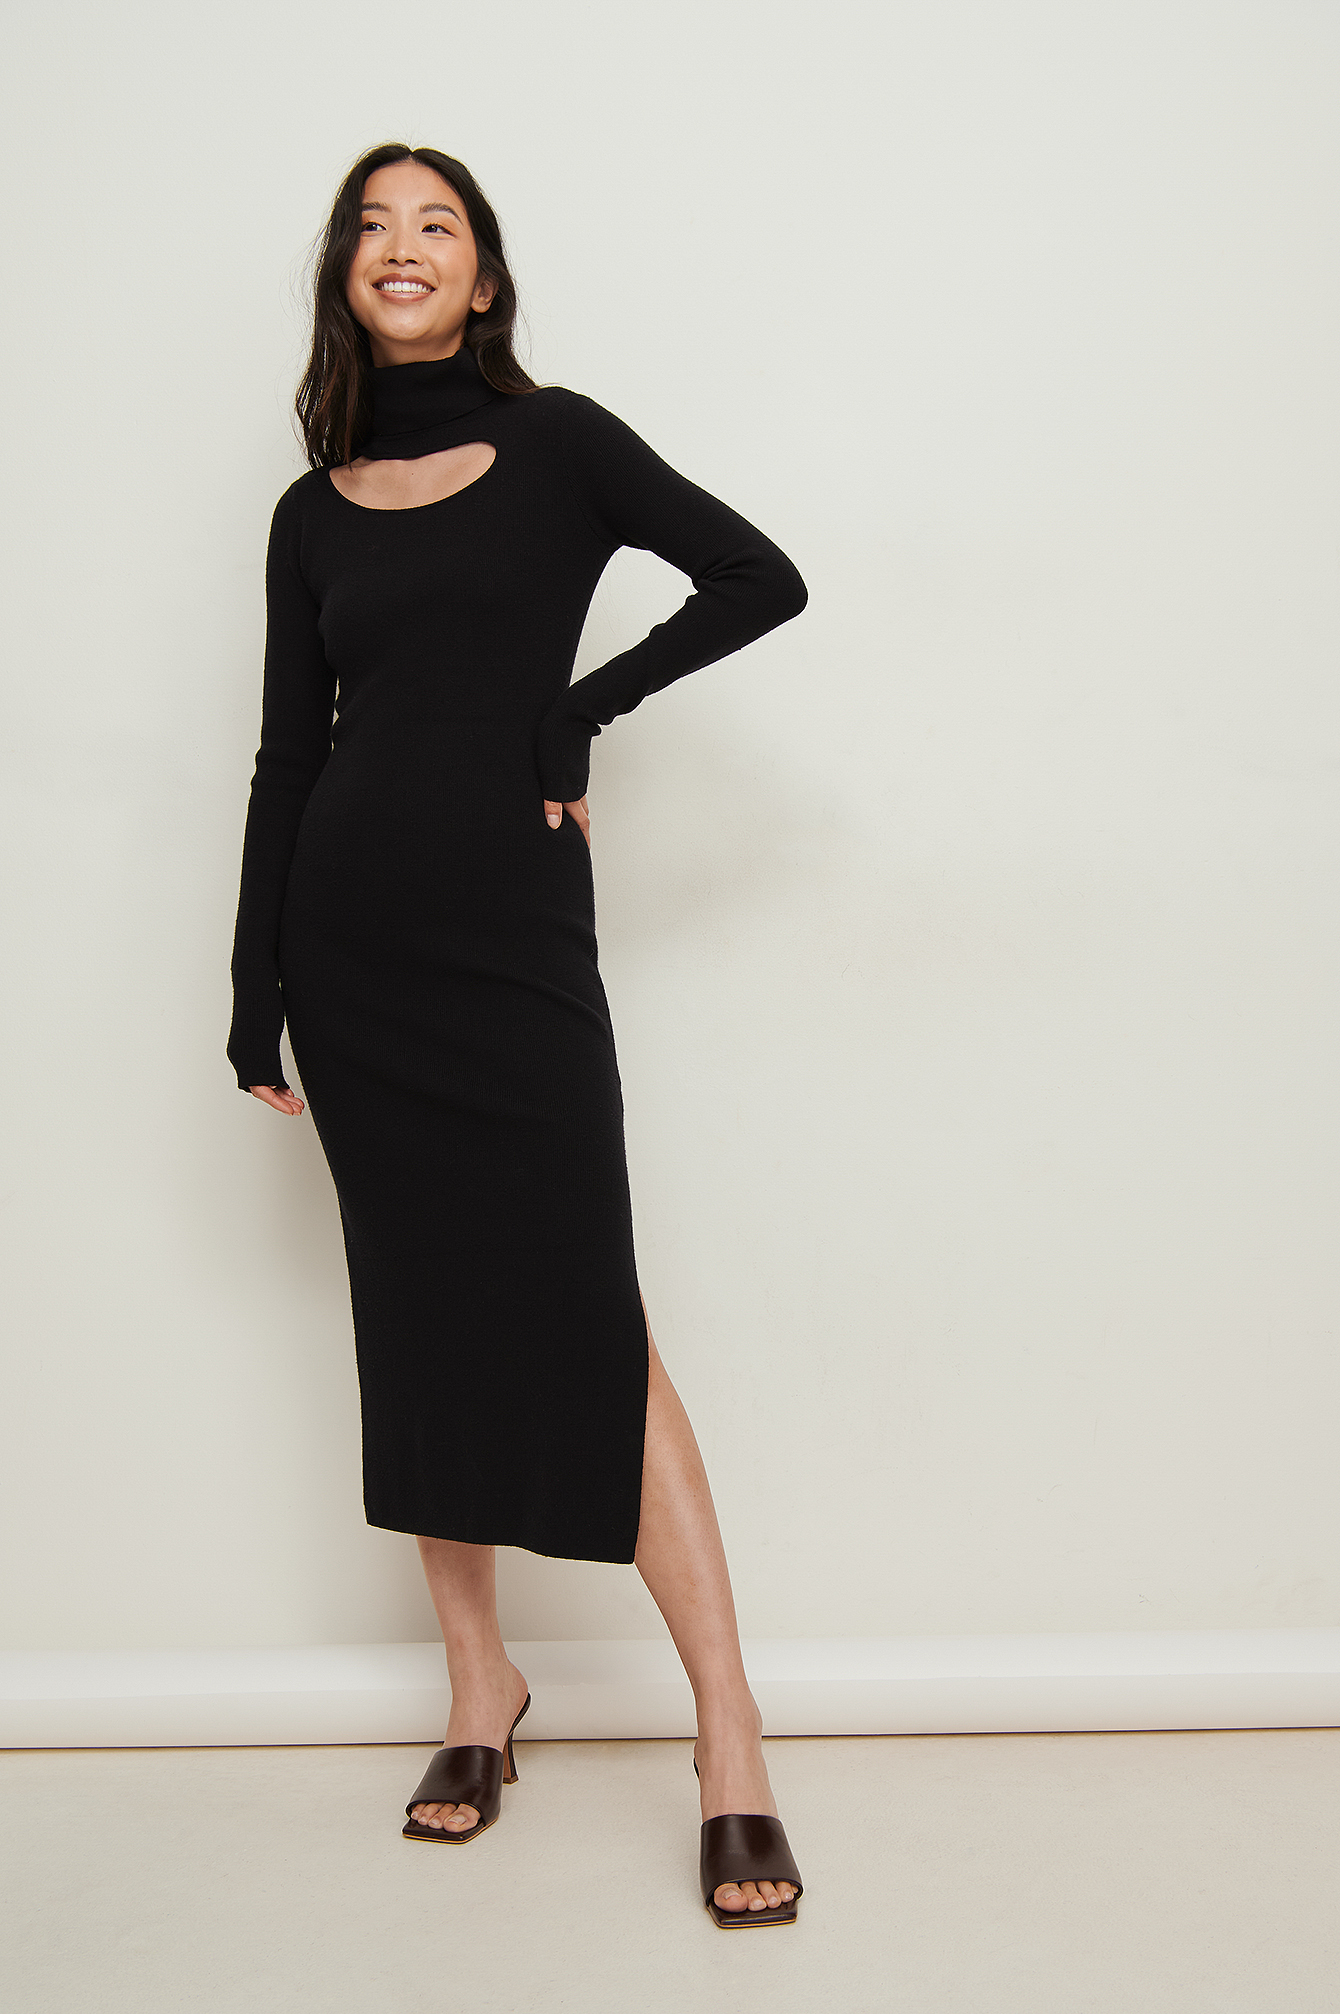 Cut Out High Neck Knitted Dress Outfit